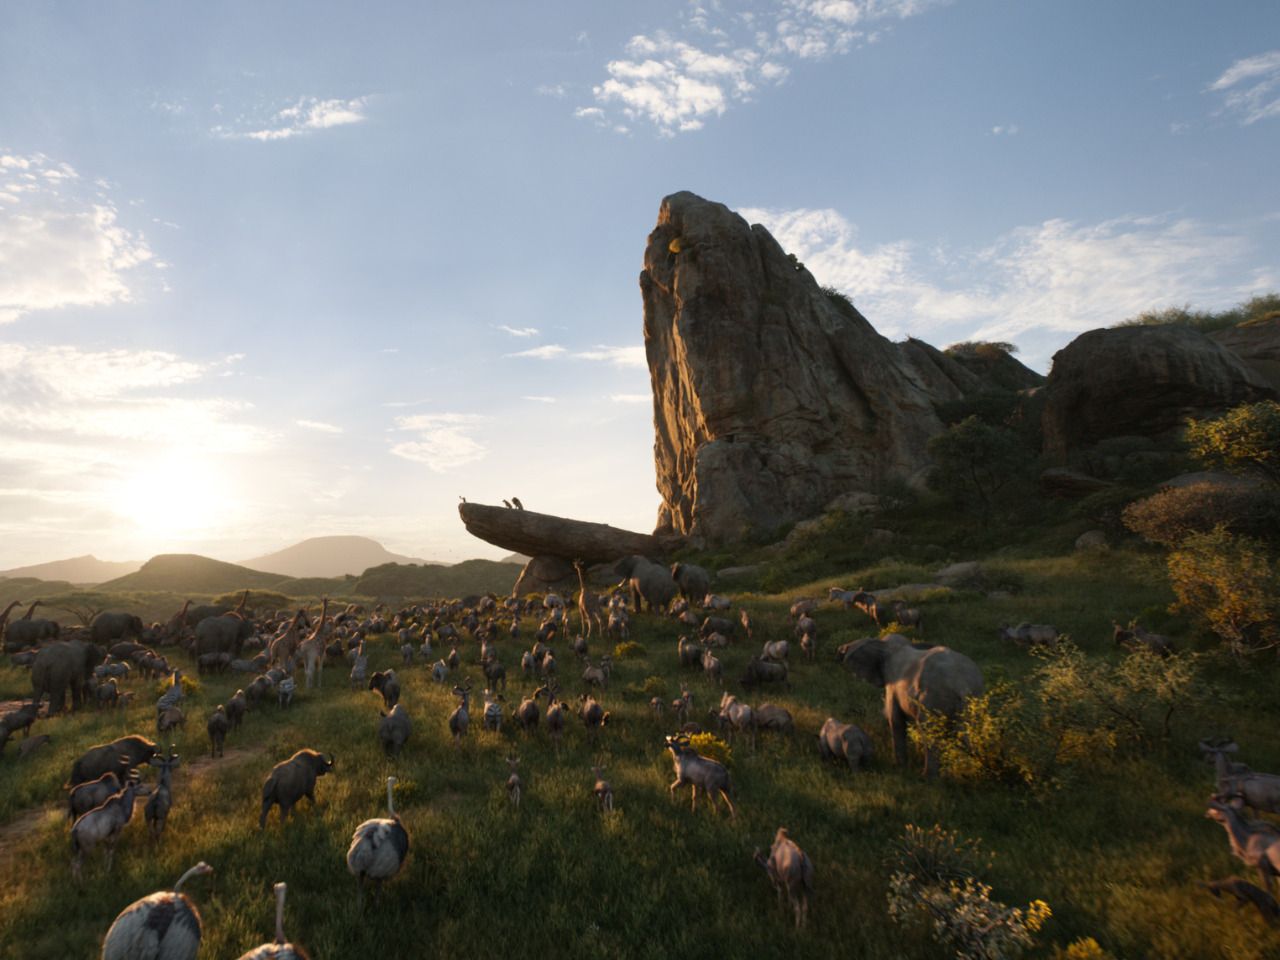 Find out more about Technicolor Creative Studios CGI work on The Lion King movie